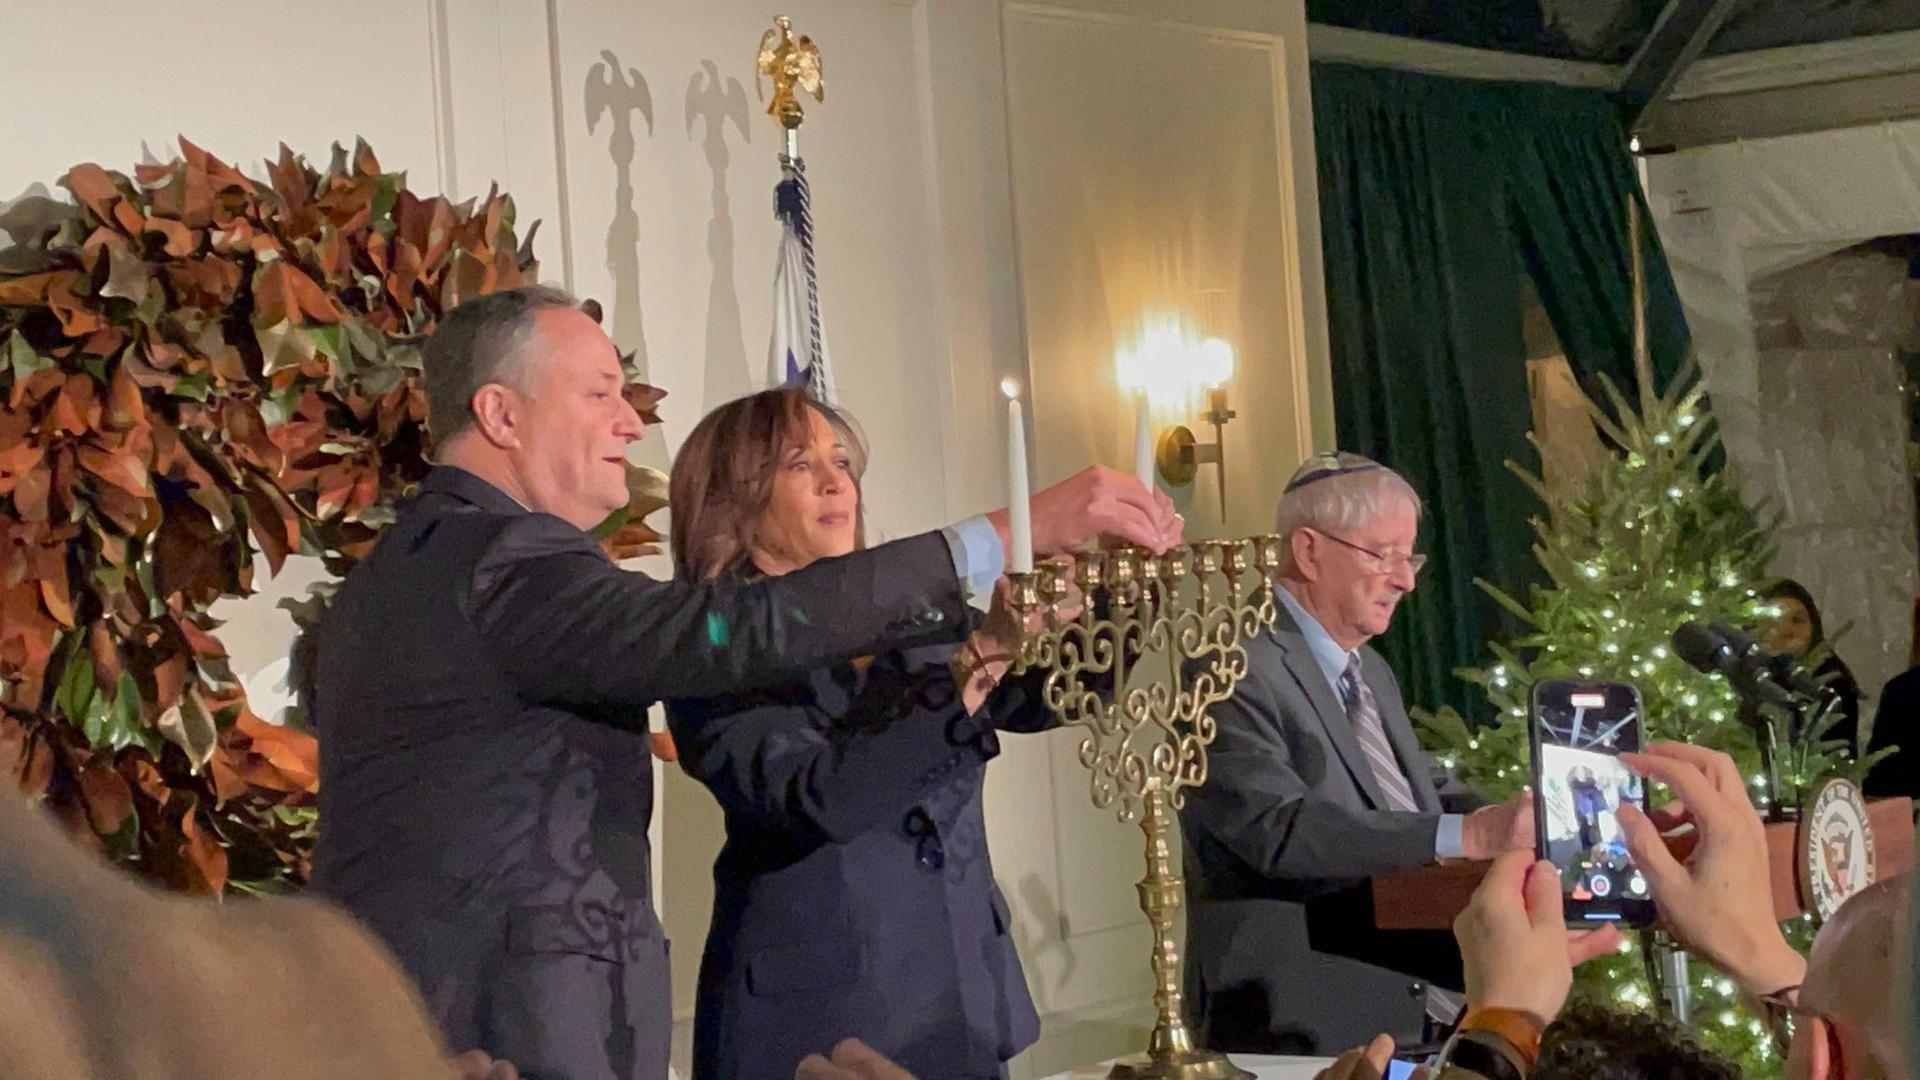 Vice President Kamala Harris and Second Gentleman Doug Emhoff hosted a Hanukkah reception Sunday at their official residence. The menorah they used was made in Eastern Europe around the late 19th century. (Jacob Kornbluh)